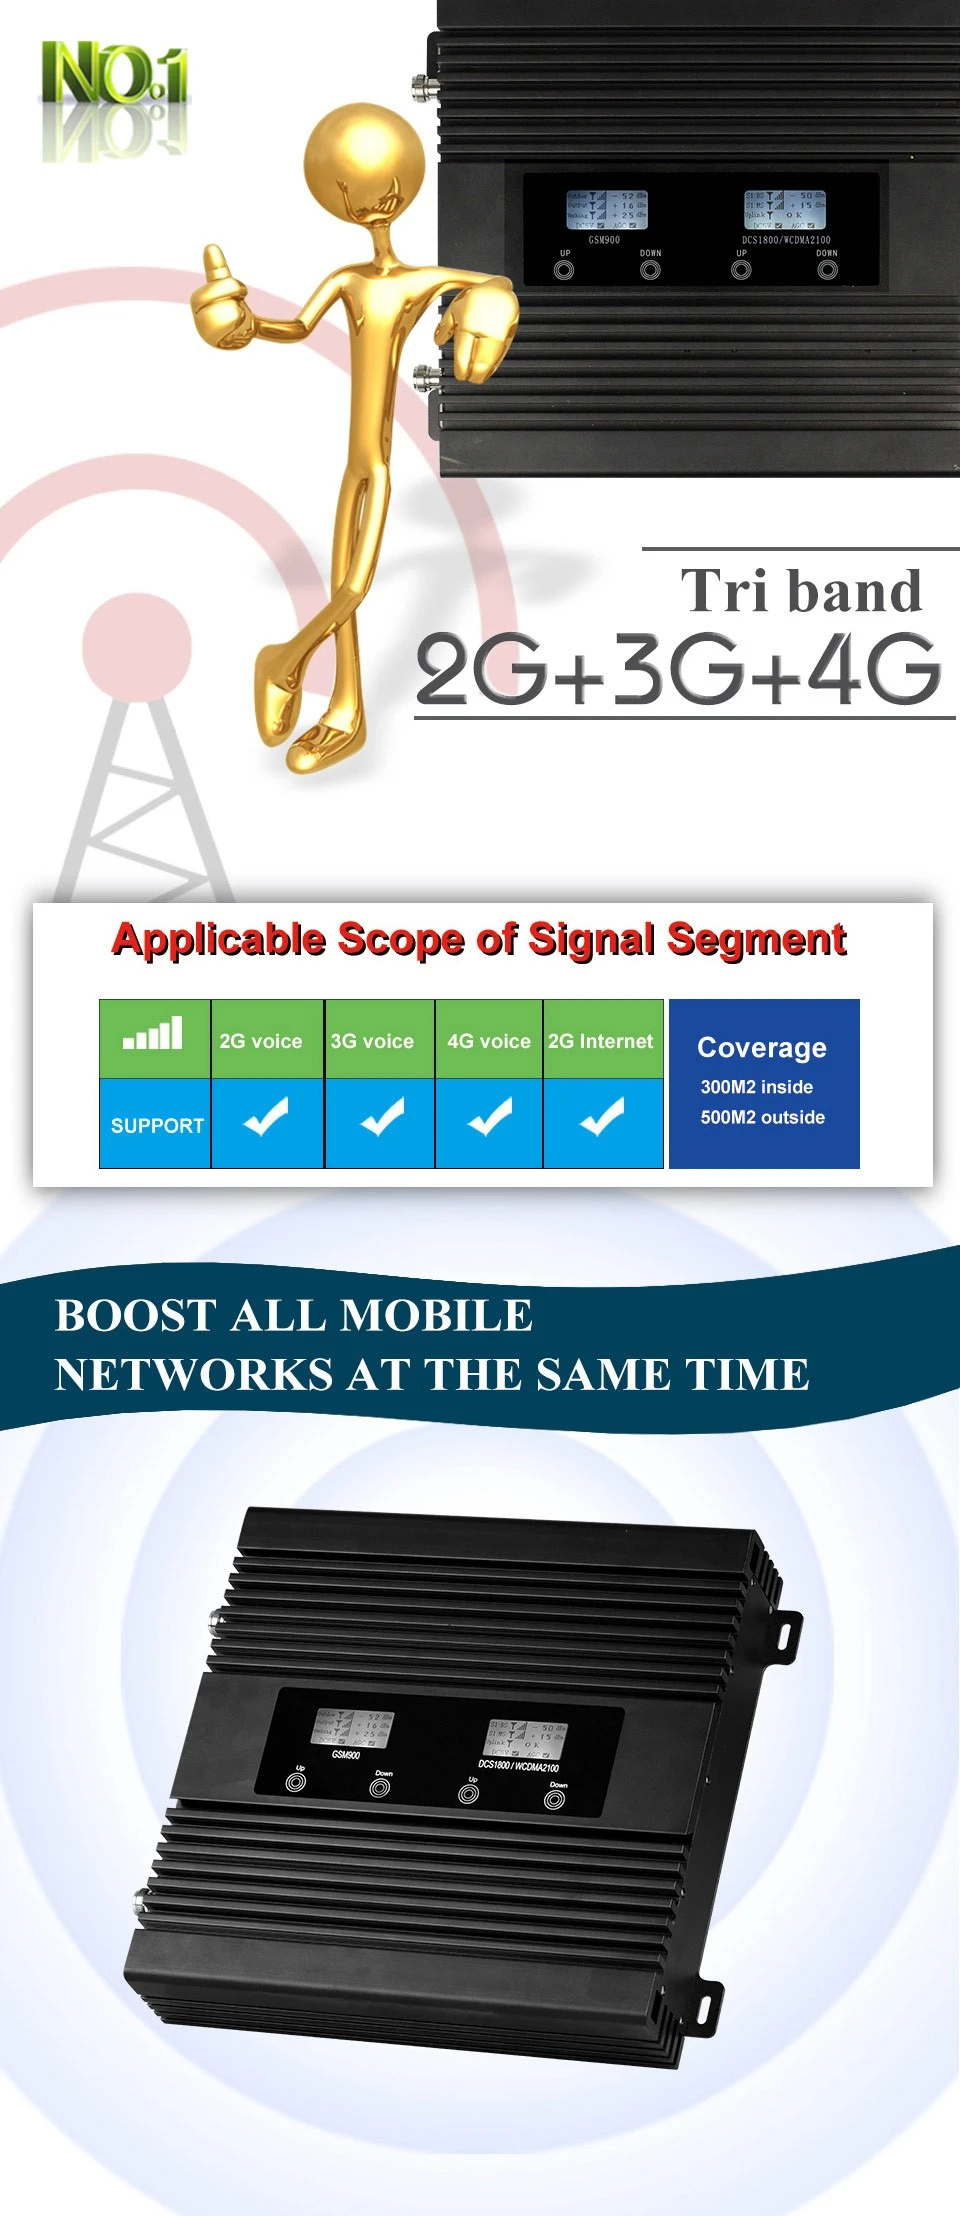 ATNJ Hot sale 1800 2100 3G 4G LTE Mobile Phone Signal Booster/Repeater/Amplifier 01.jpg